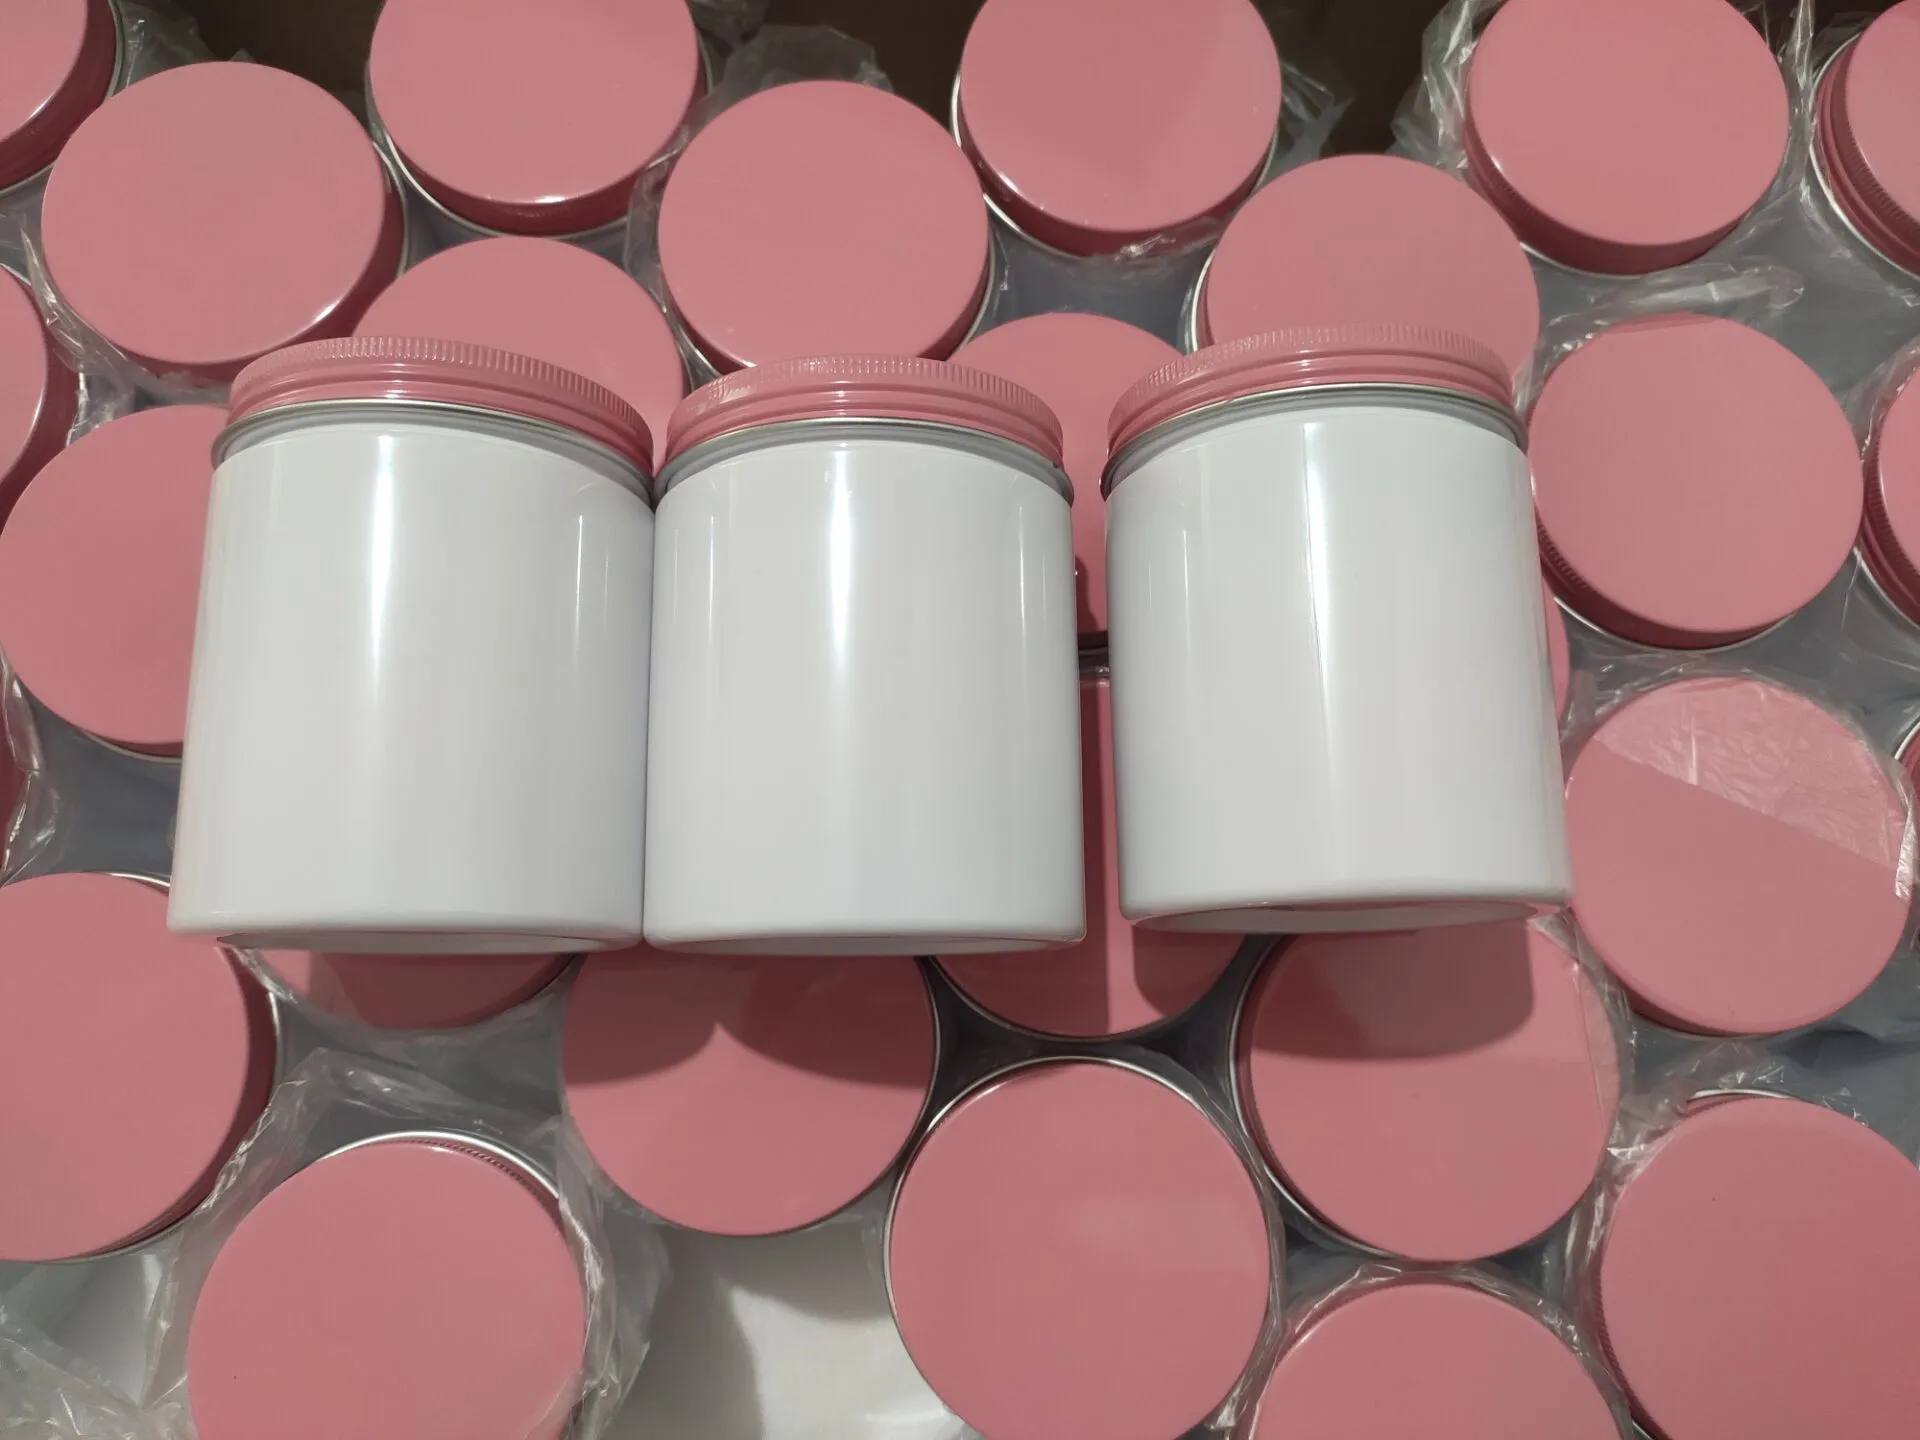 

Wholesale 200g 250g Plastic Cream Jars Facial Mask Containers Skin Care Cream Tins Bottle Cream Cosmetic Refillable Packaging